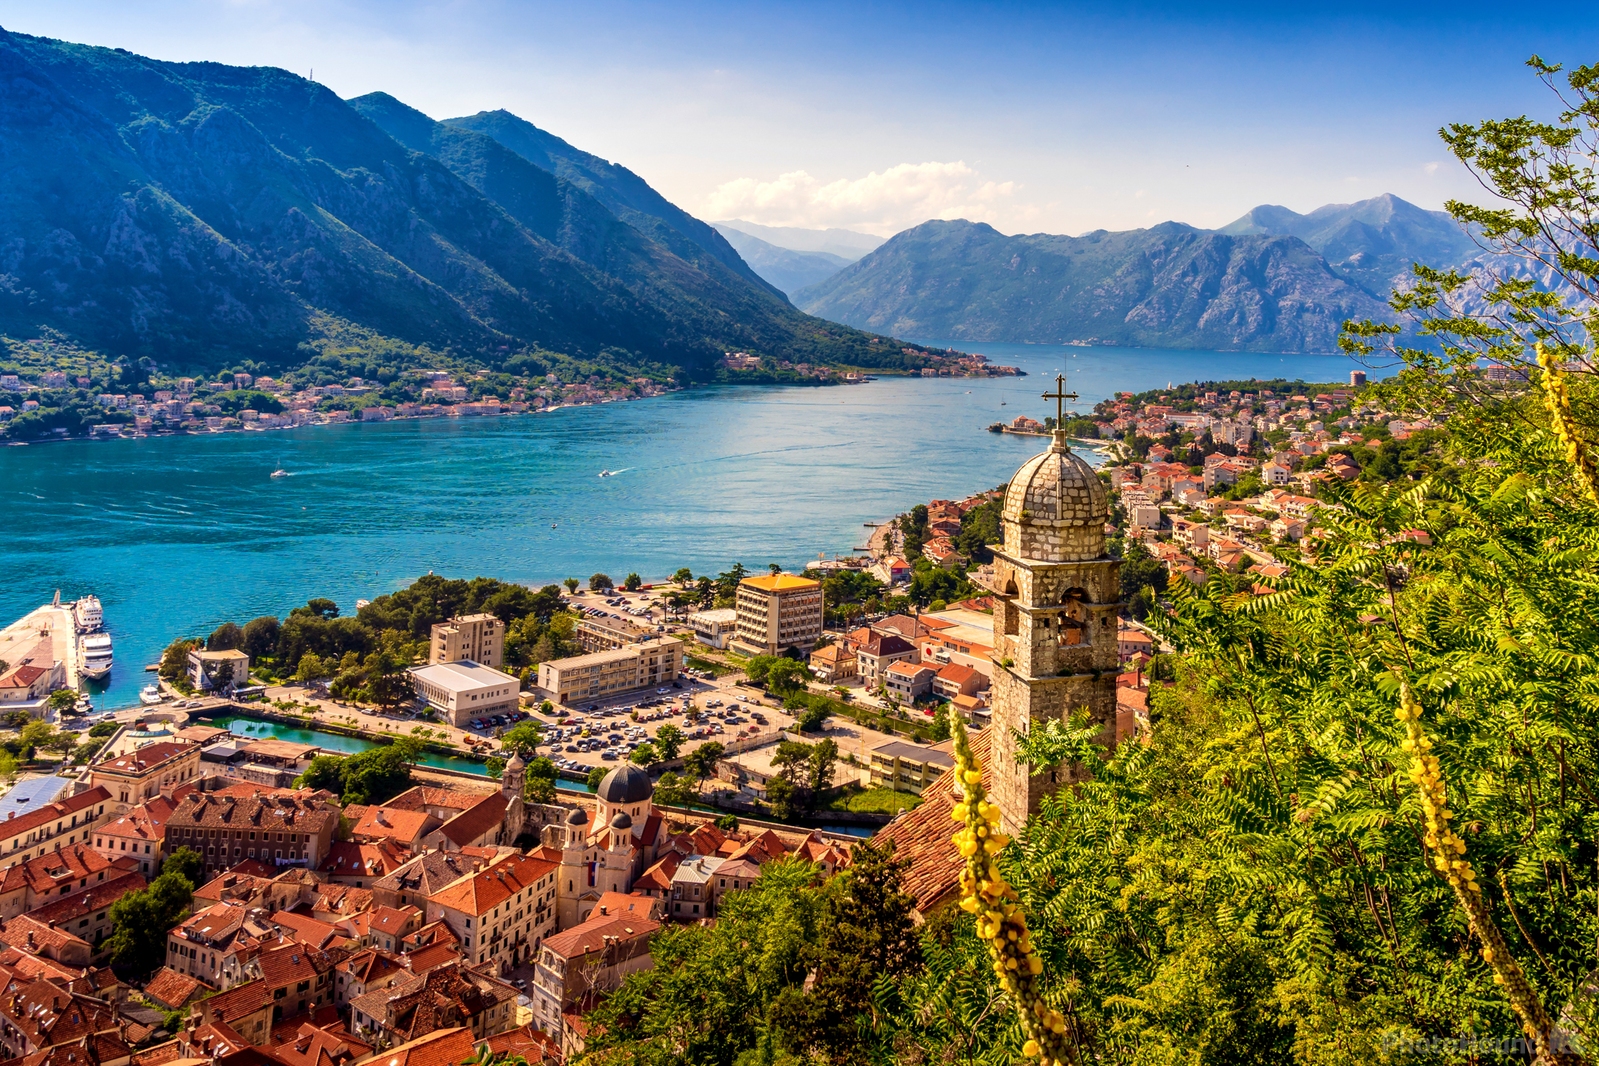 Image of Kotor Our Lady of Health  by Ilya Melnik